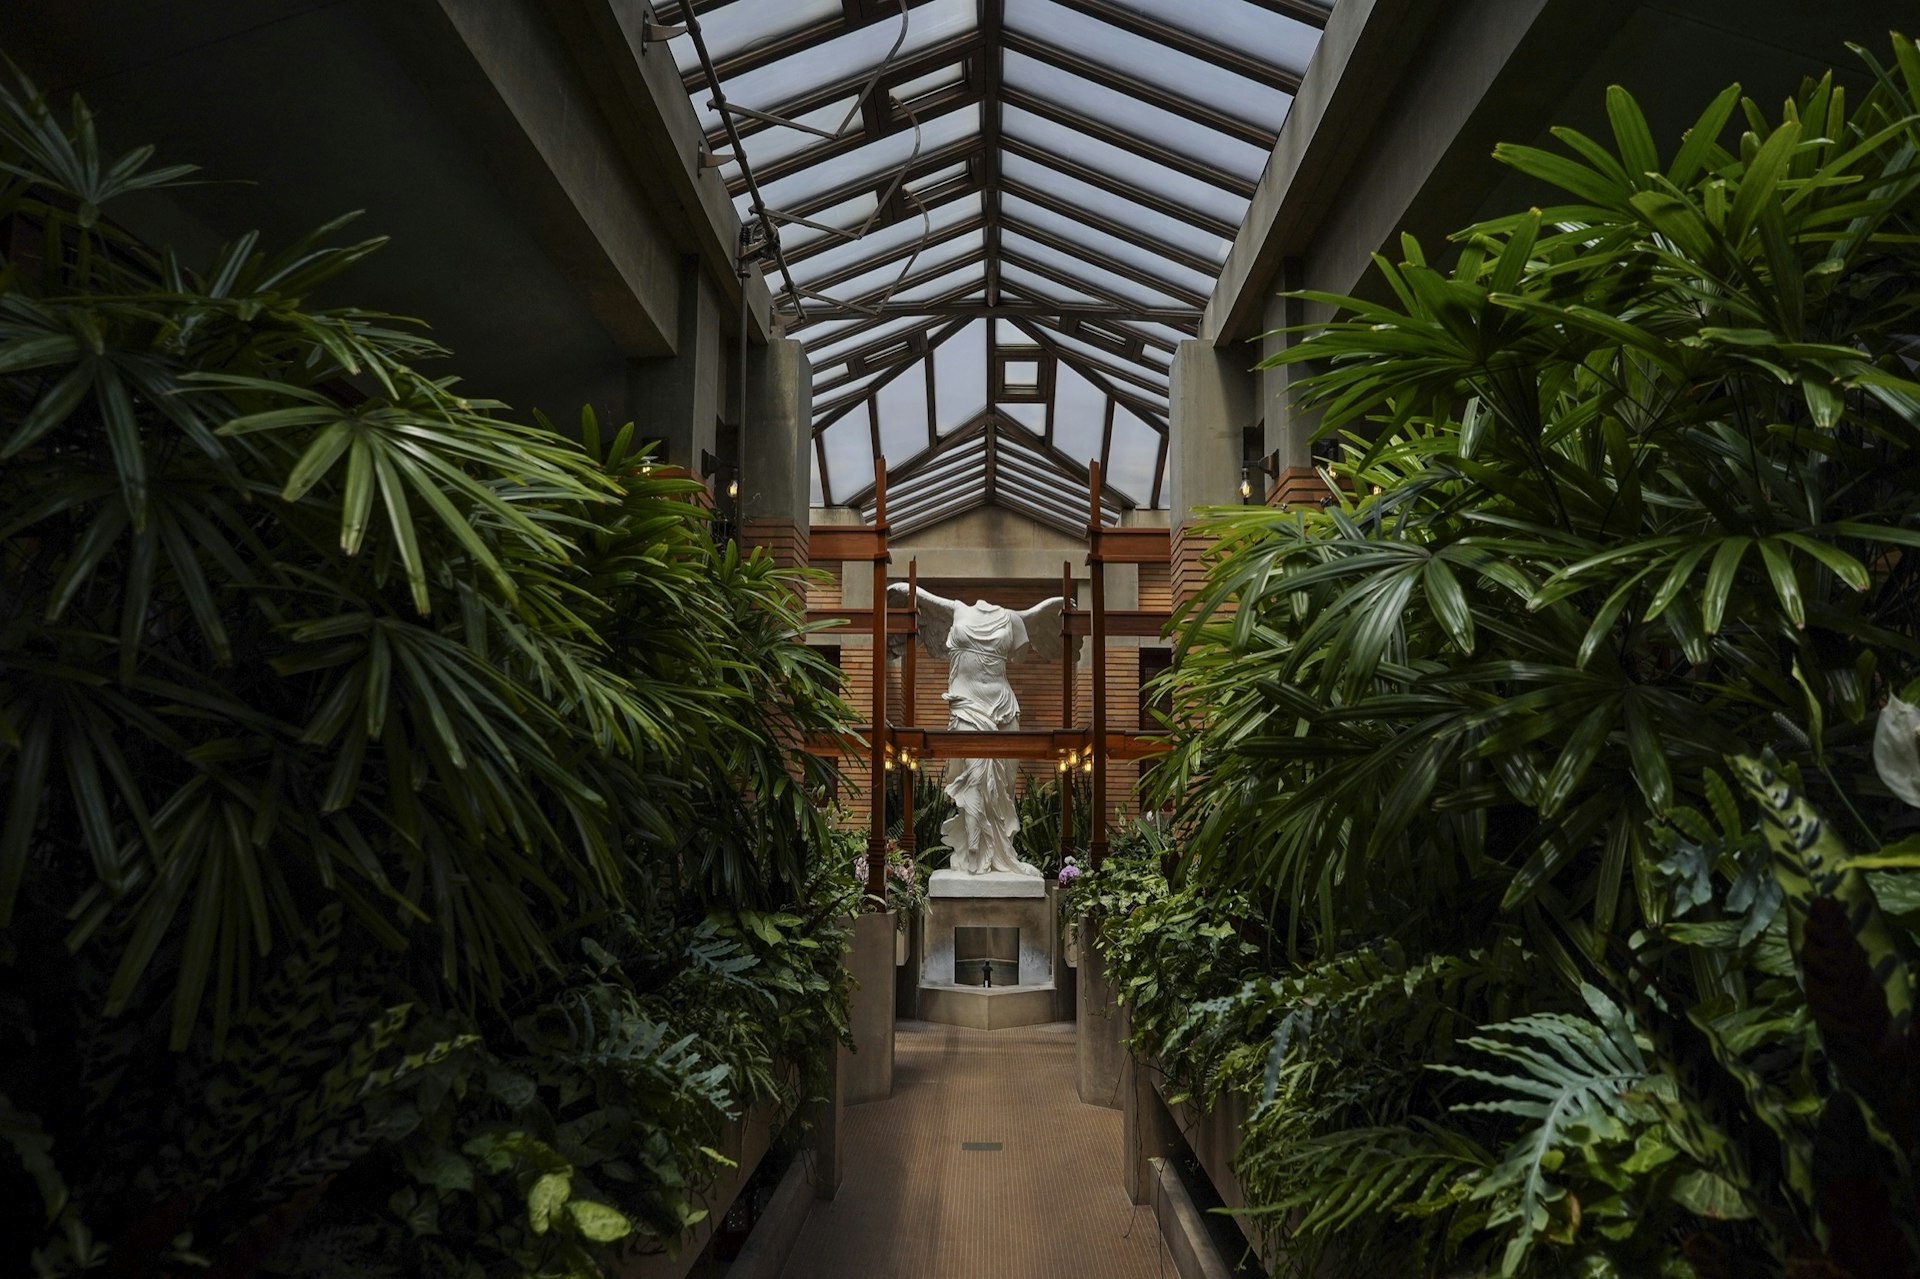 A statue of Nike of Samothrace presides over the conservatory at the Martin House, designed by Frank Lloyd Wright, in Buffalo